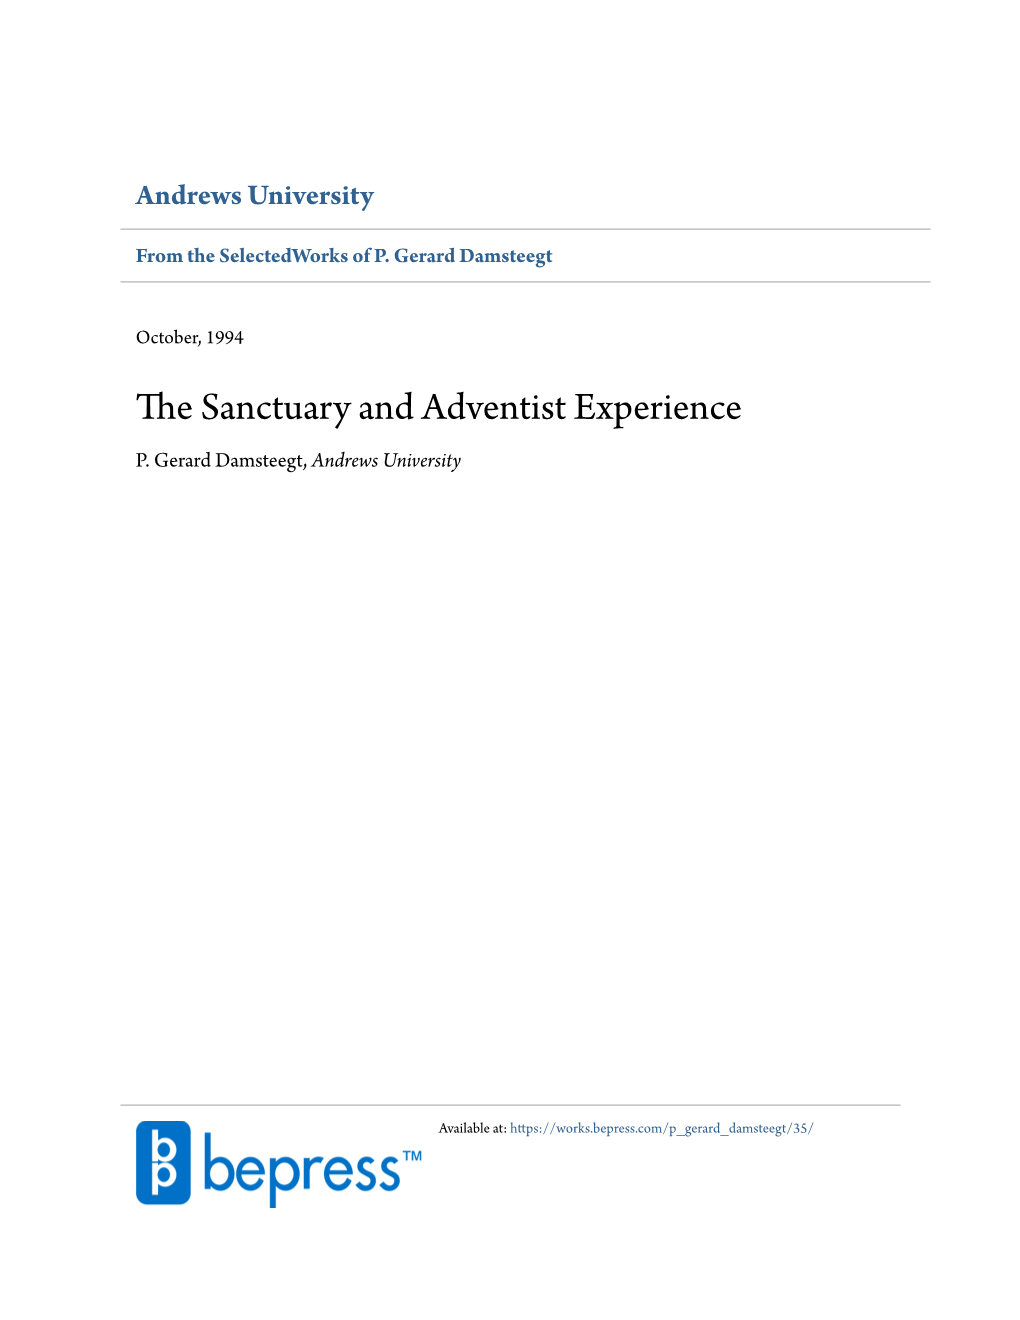 The Sanctuary and Adventist Experience